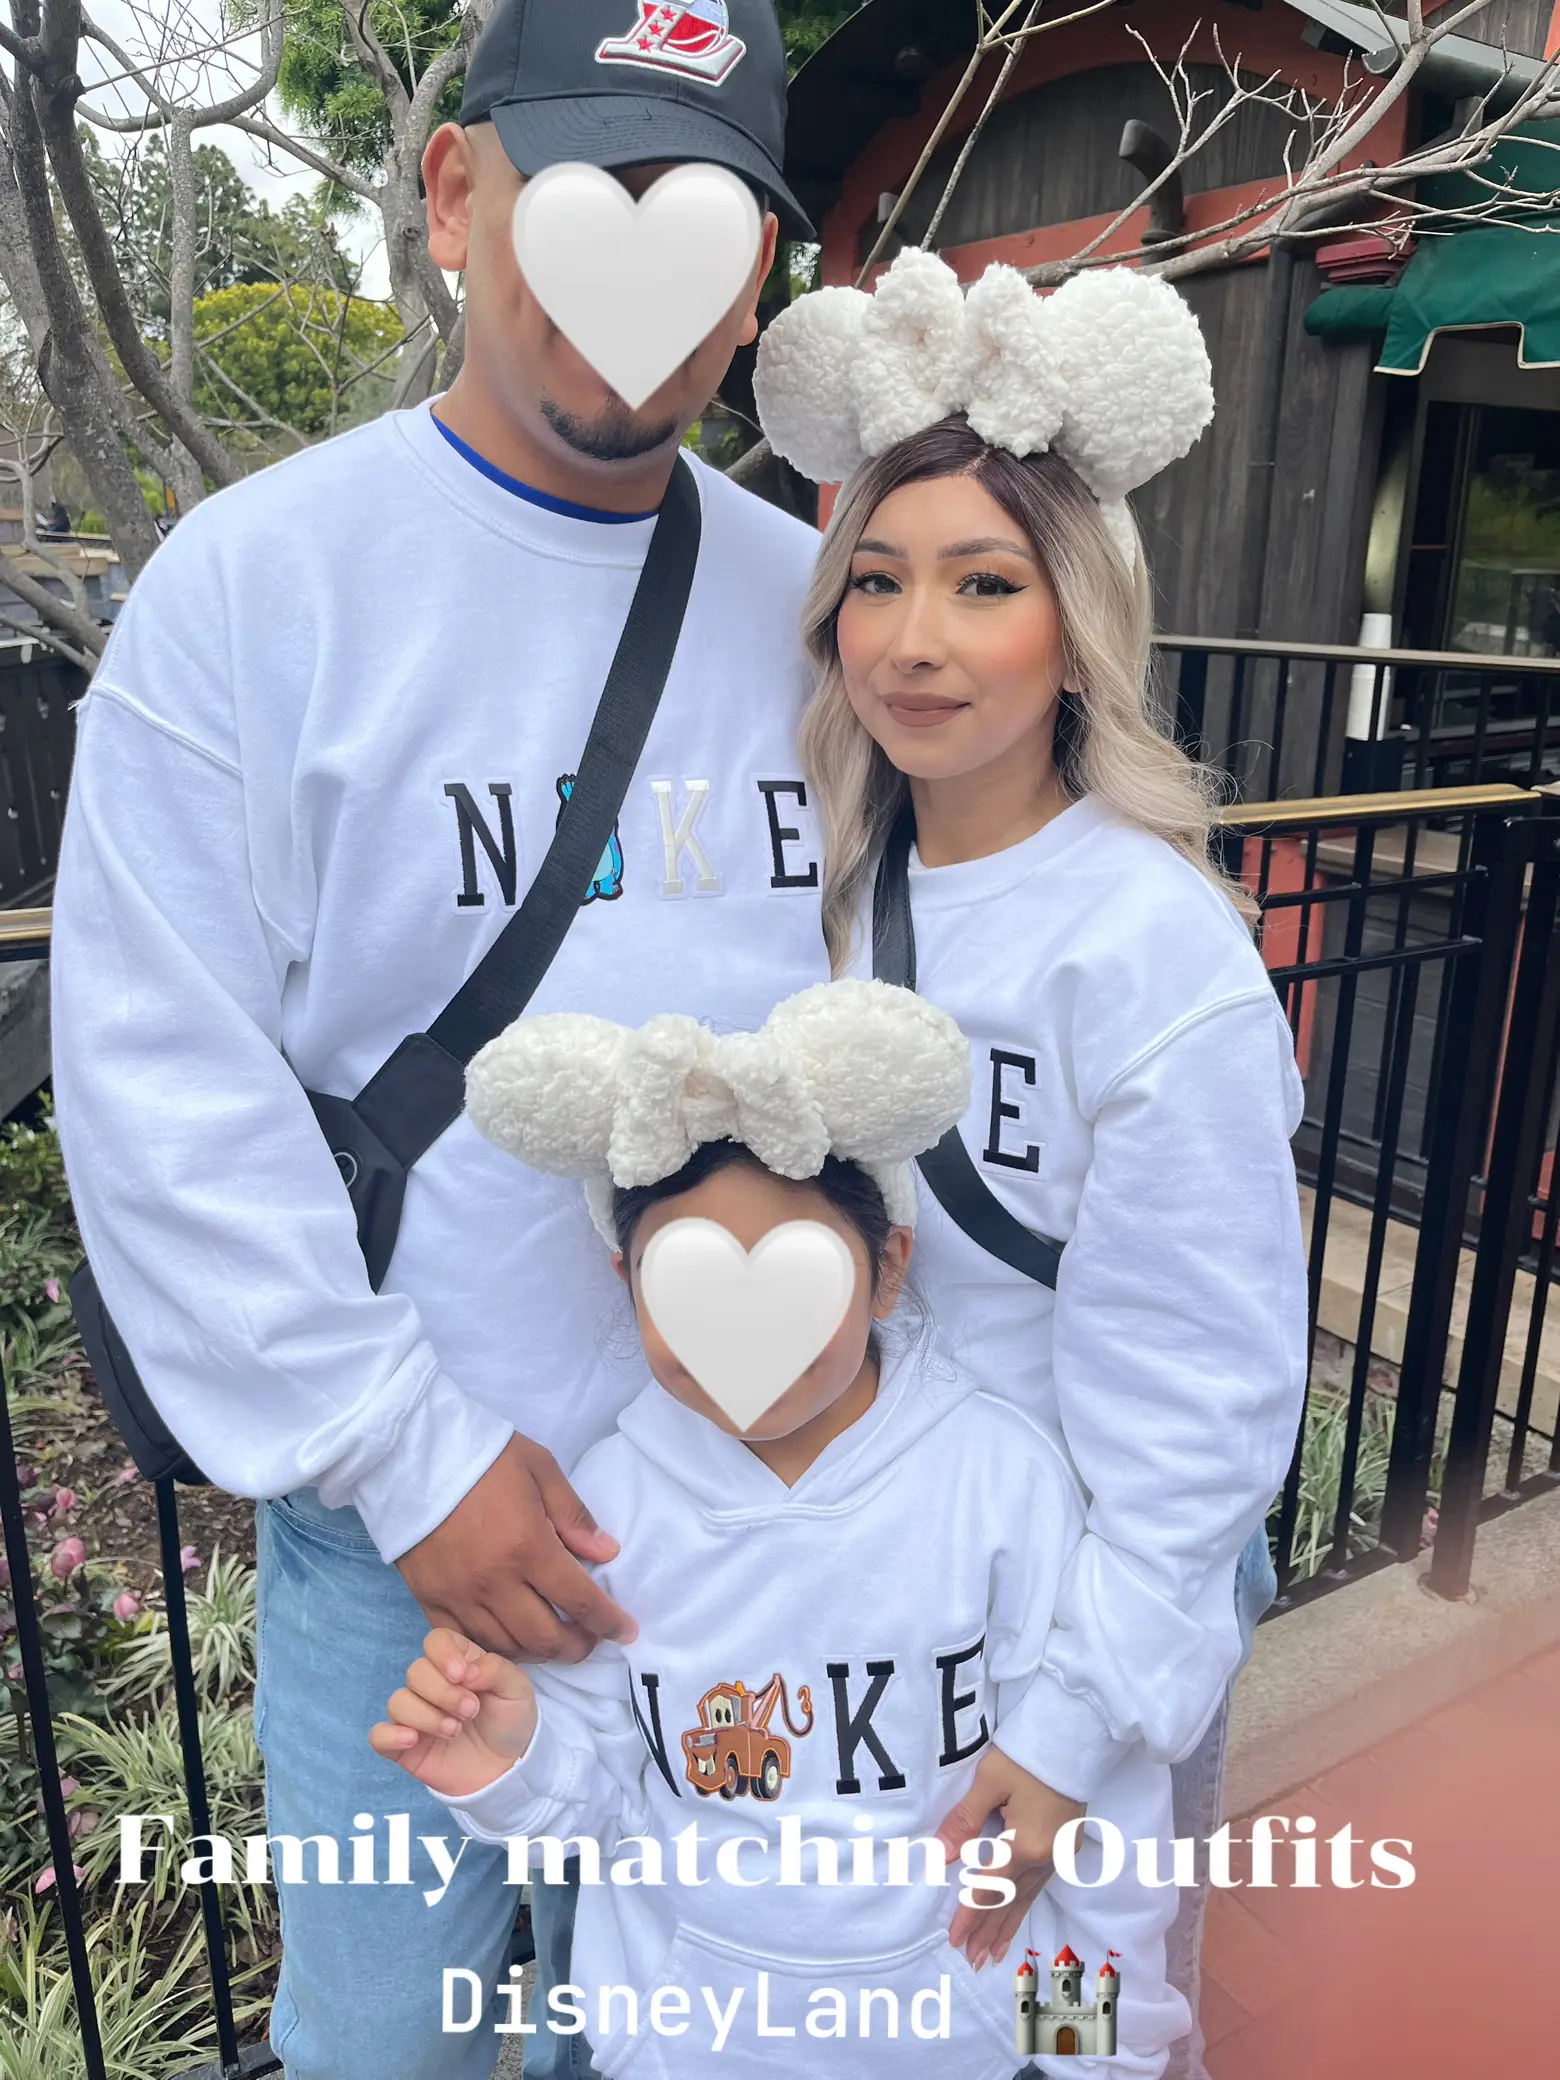 Disney outfit  Disney outfits, Disneyland couples outfits, Disneyland  outfits